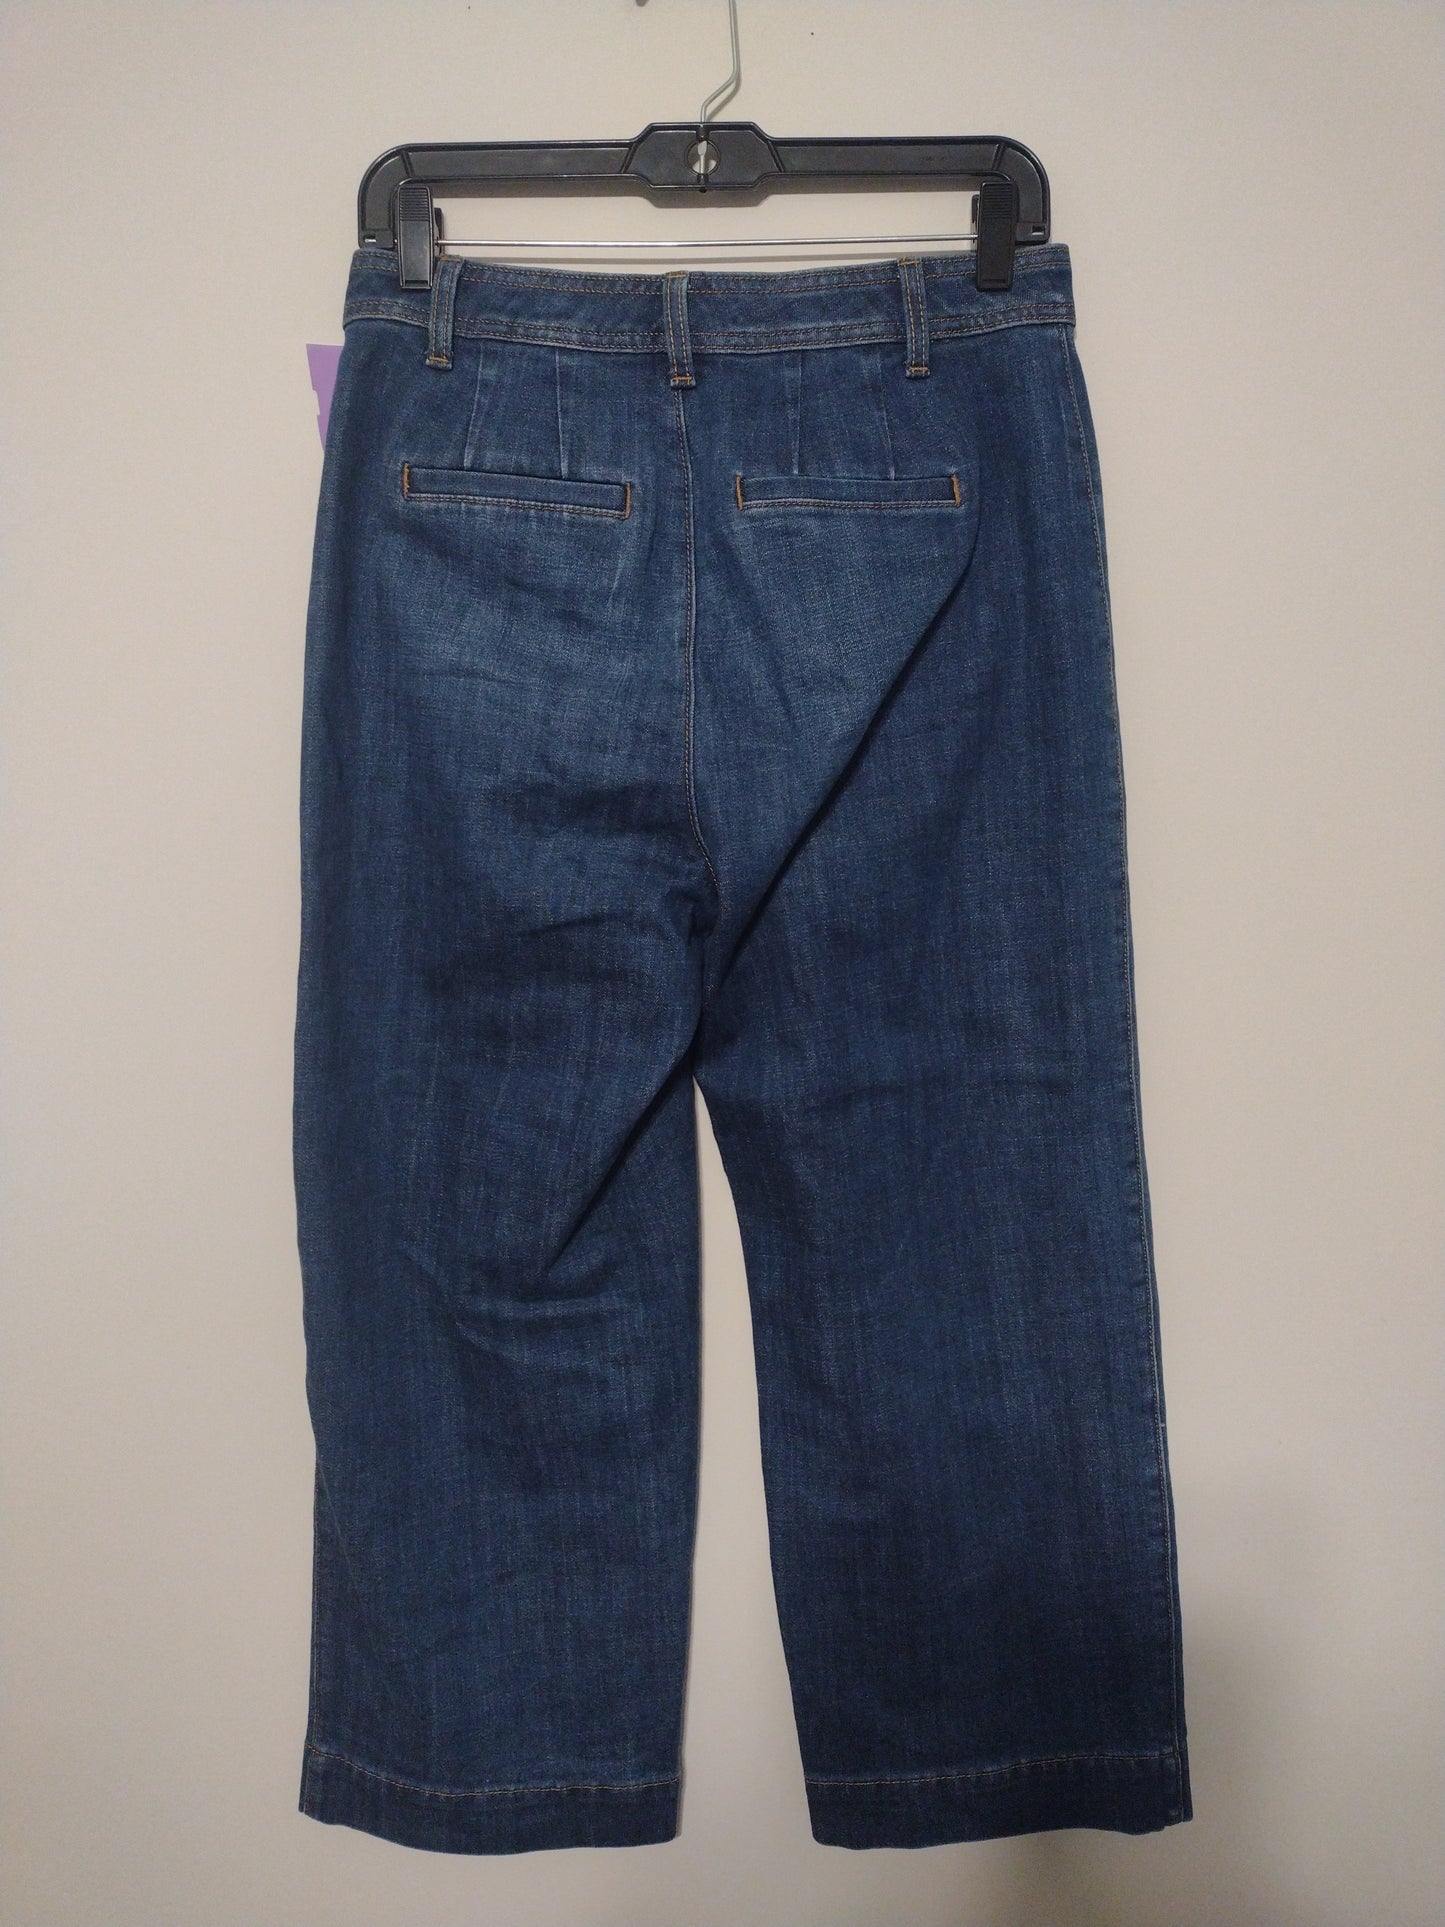 Jeans Cropped By Talbots  Size: 4